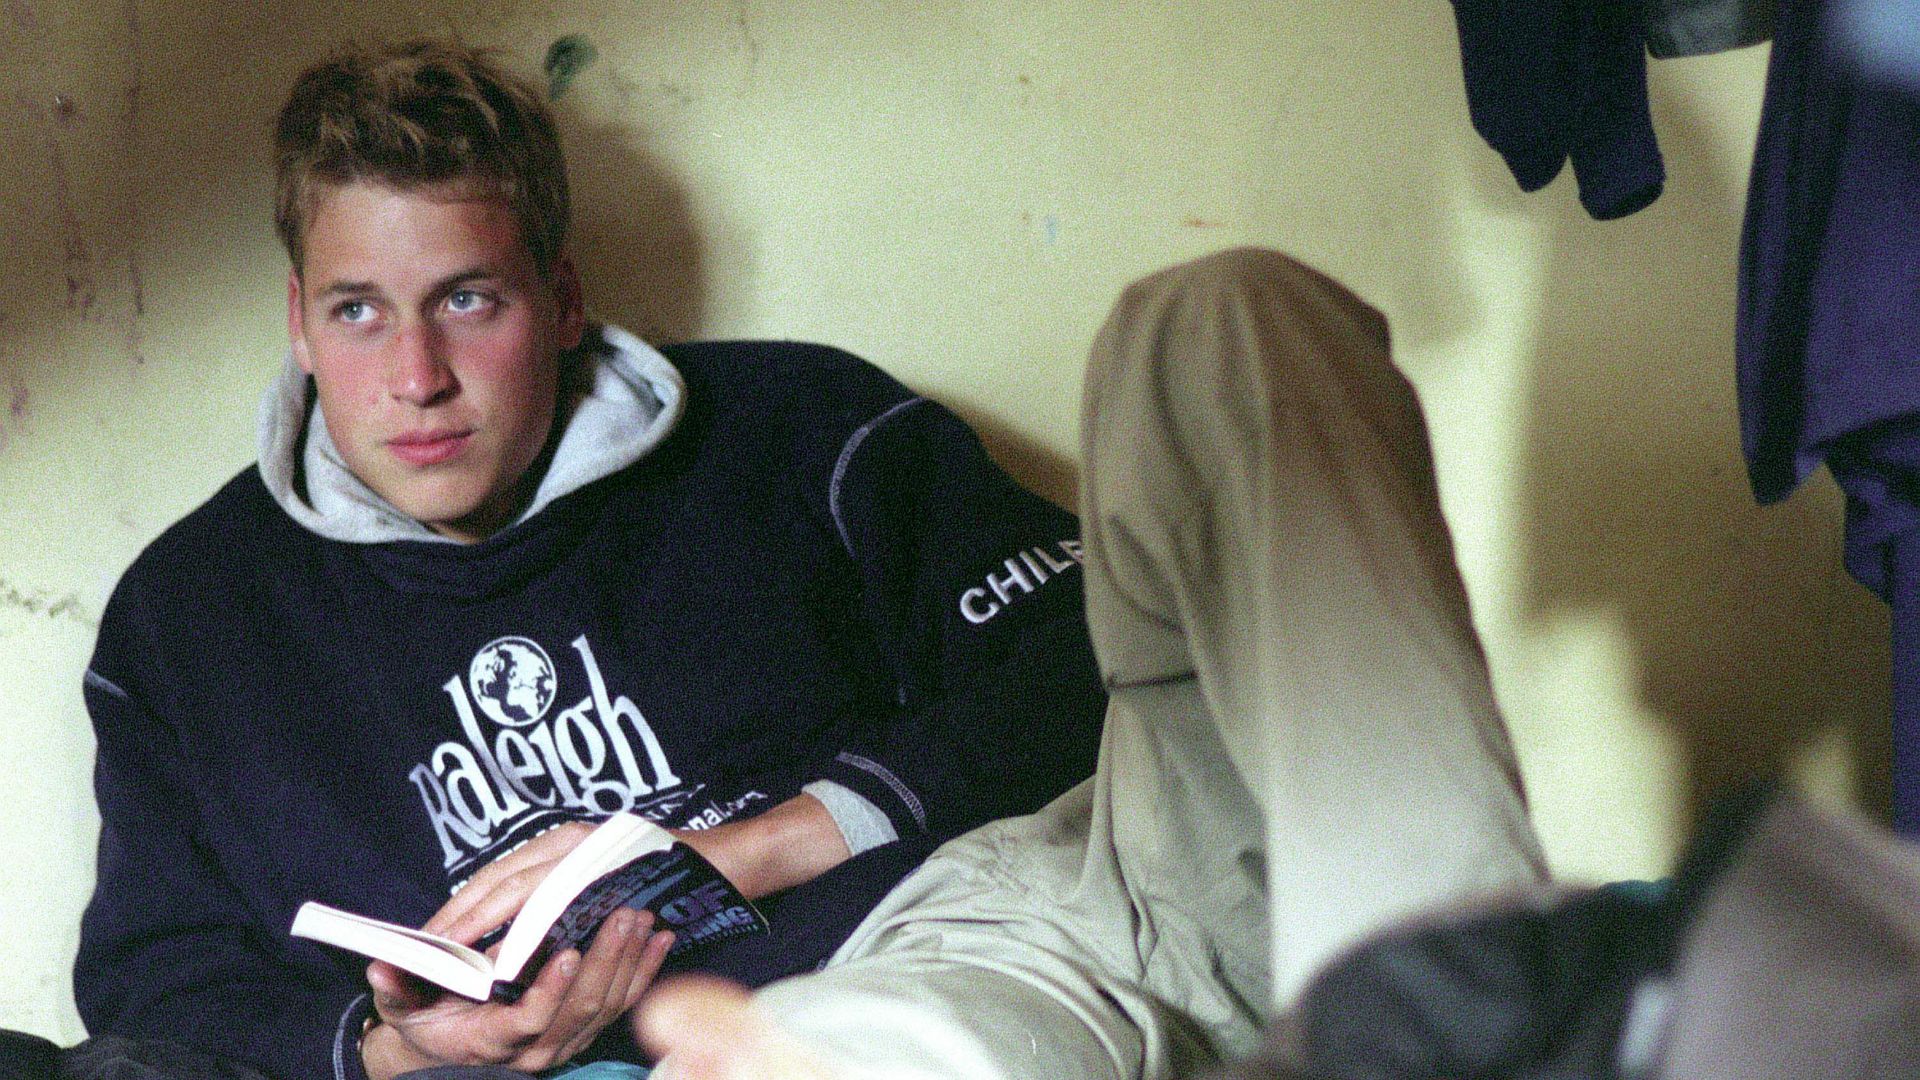 Prince William During His Raleigh International Expedition In Southern Chile, Relaxing In The Team's Accommodation In The Village Of Tortel.